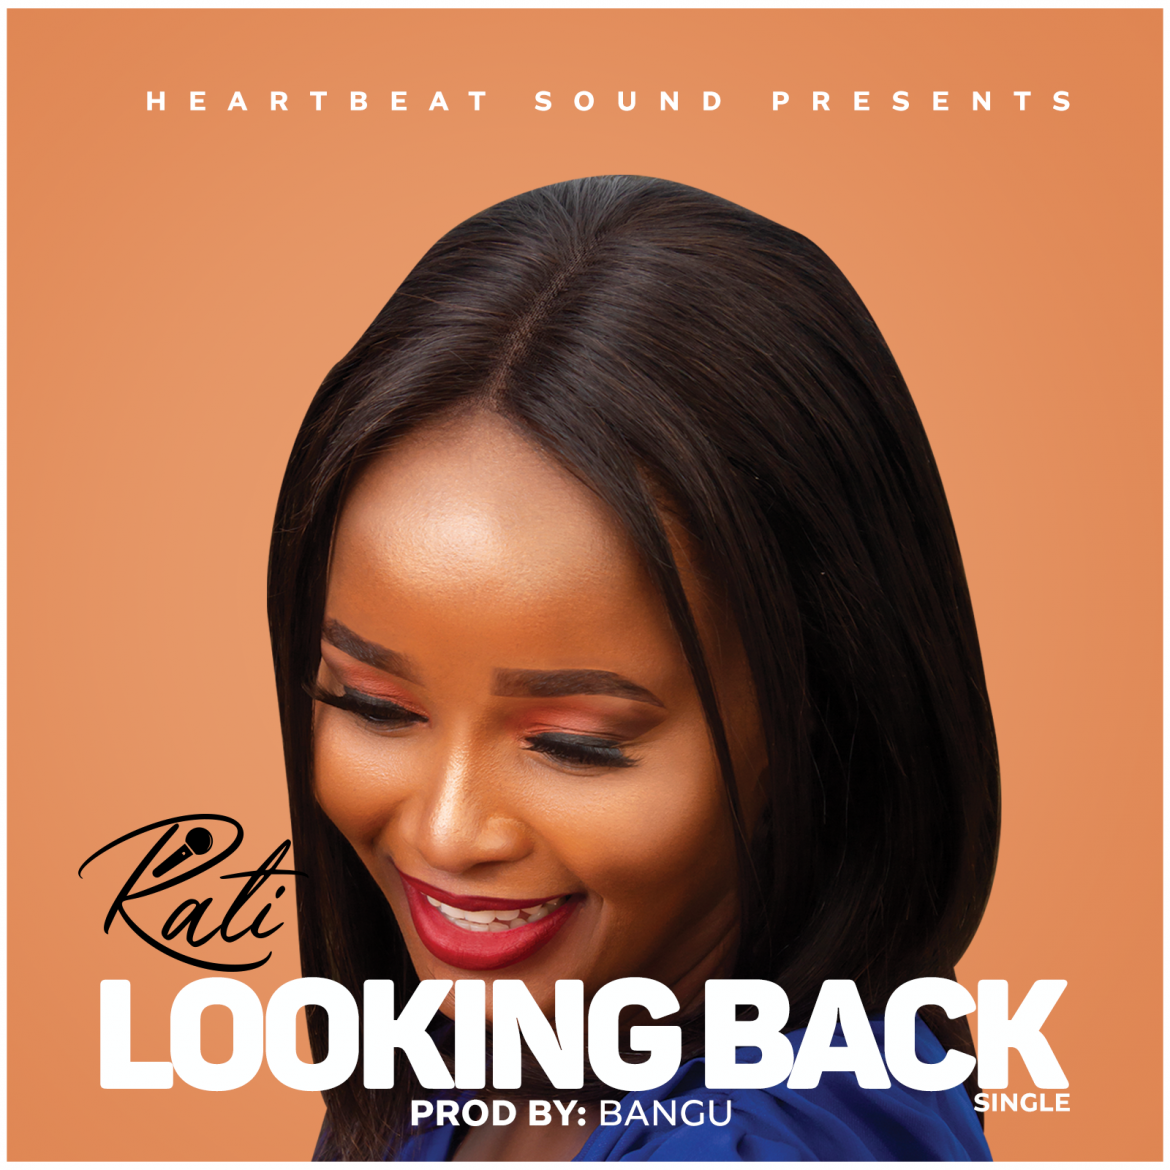 Afro Pop Artist Rati Releases Flirty Single Off Her Debut EP Emotions.